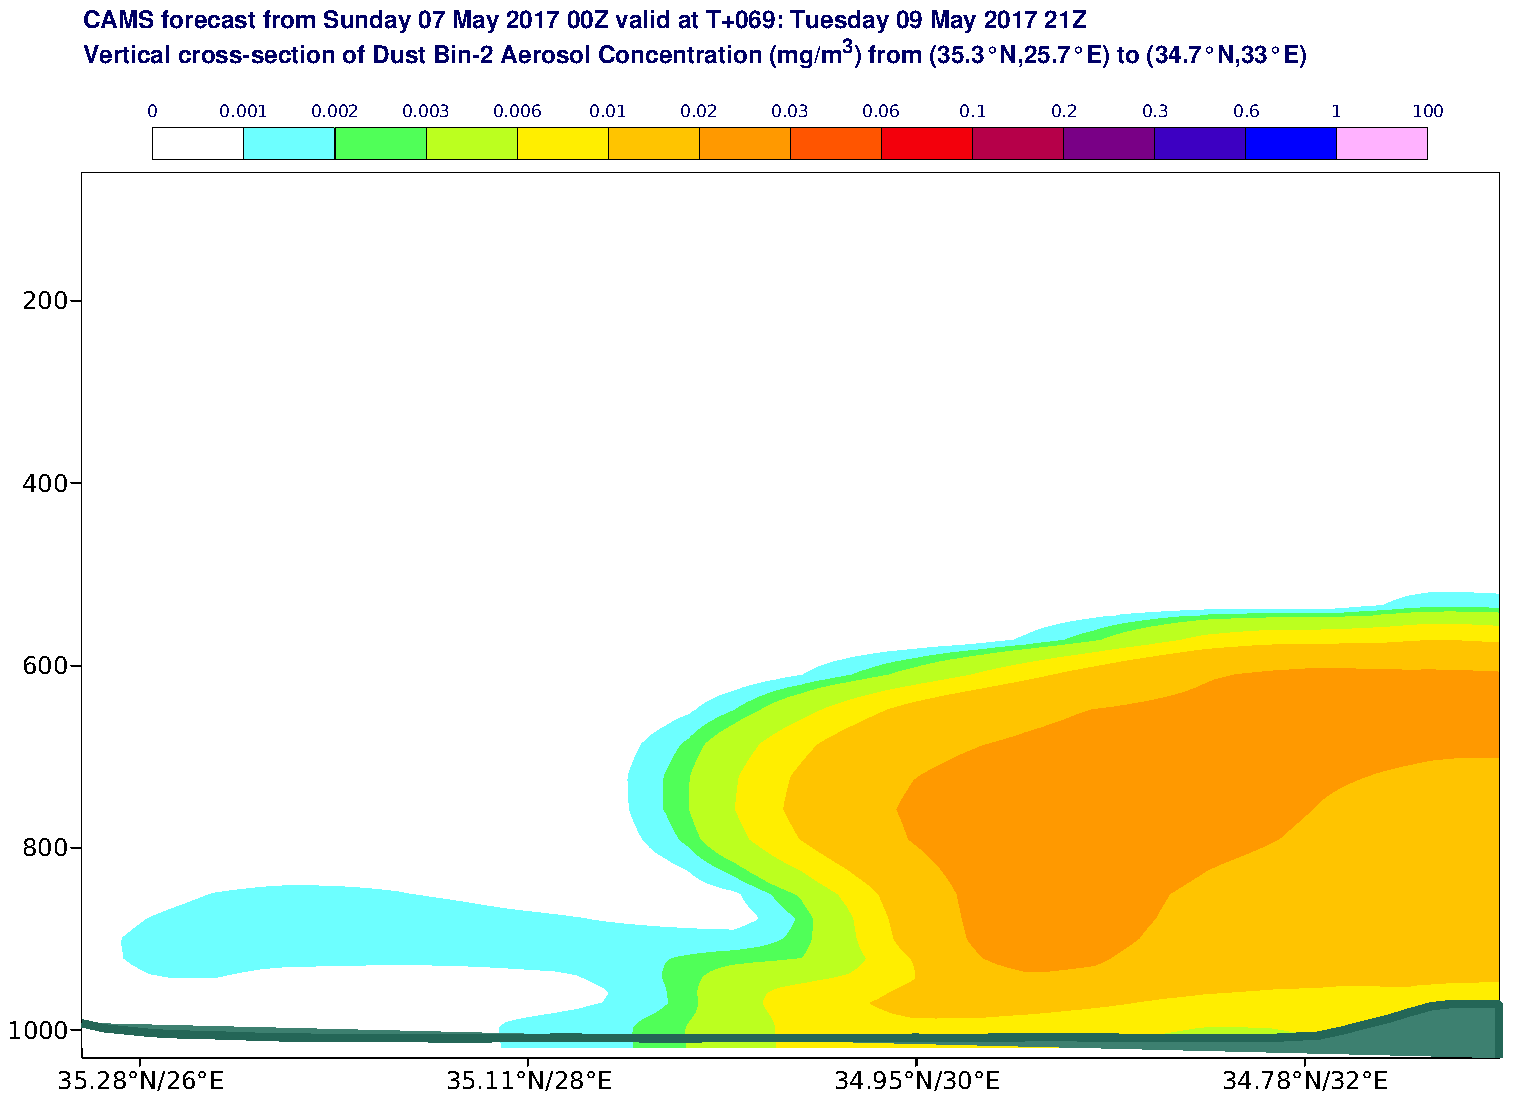 Vertical cross-section of Dust Bin-2 Aerosol Concentration (mg/m3) valid at T69 - 2017-05-09 21:00